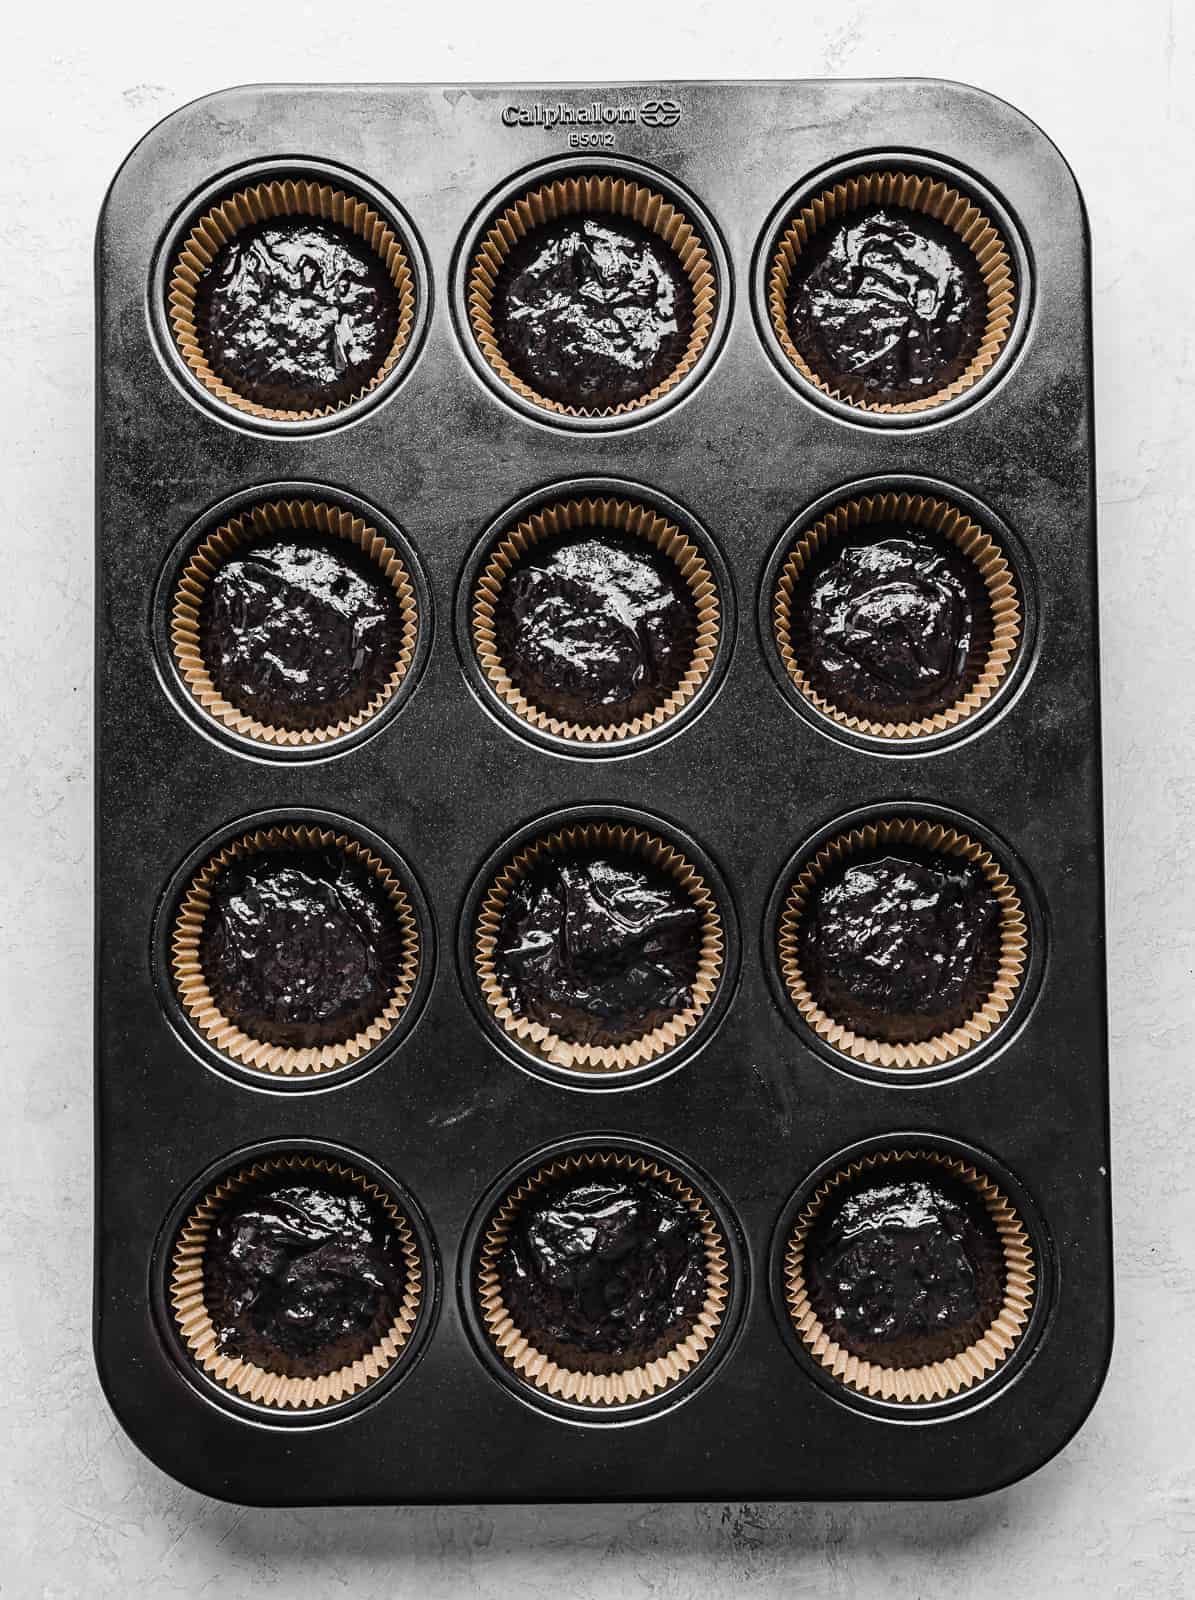 A cupcake pan with Black Velvet Cupcake batter in each compartment.